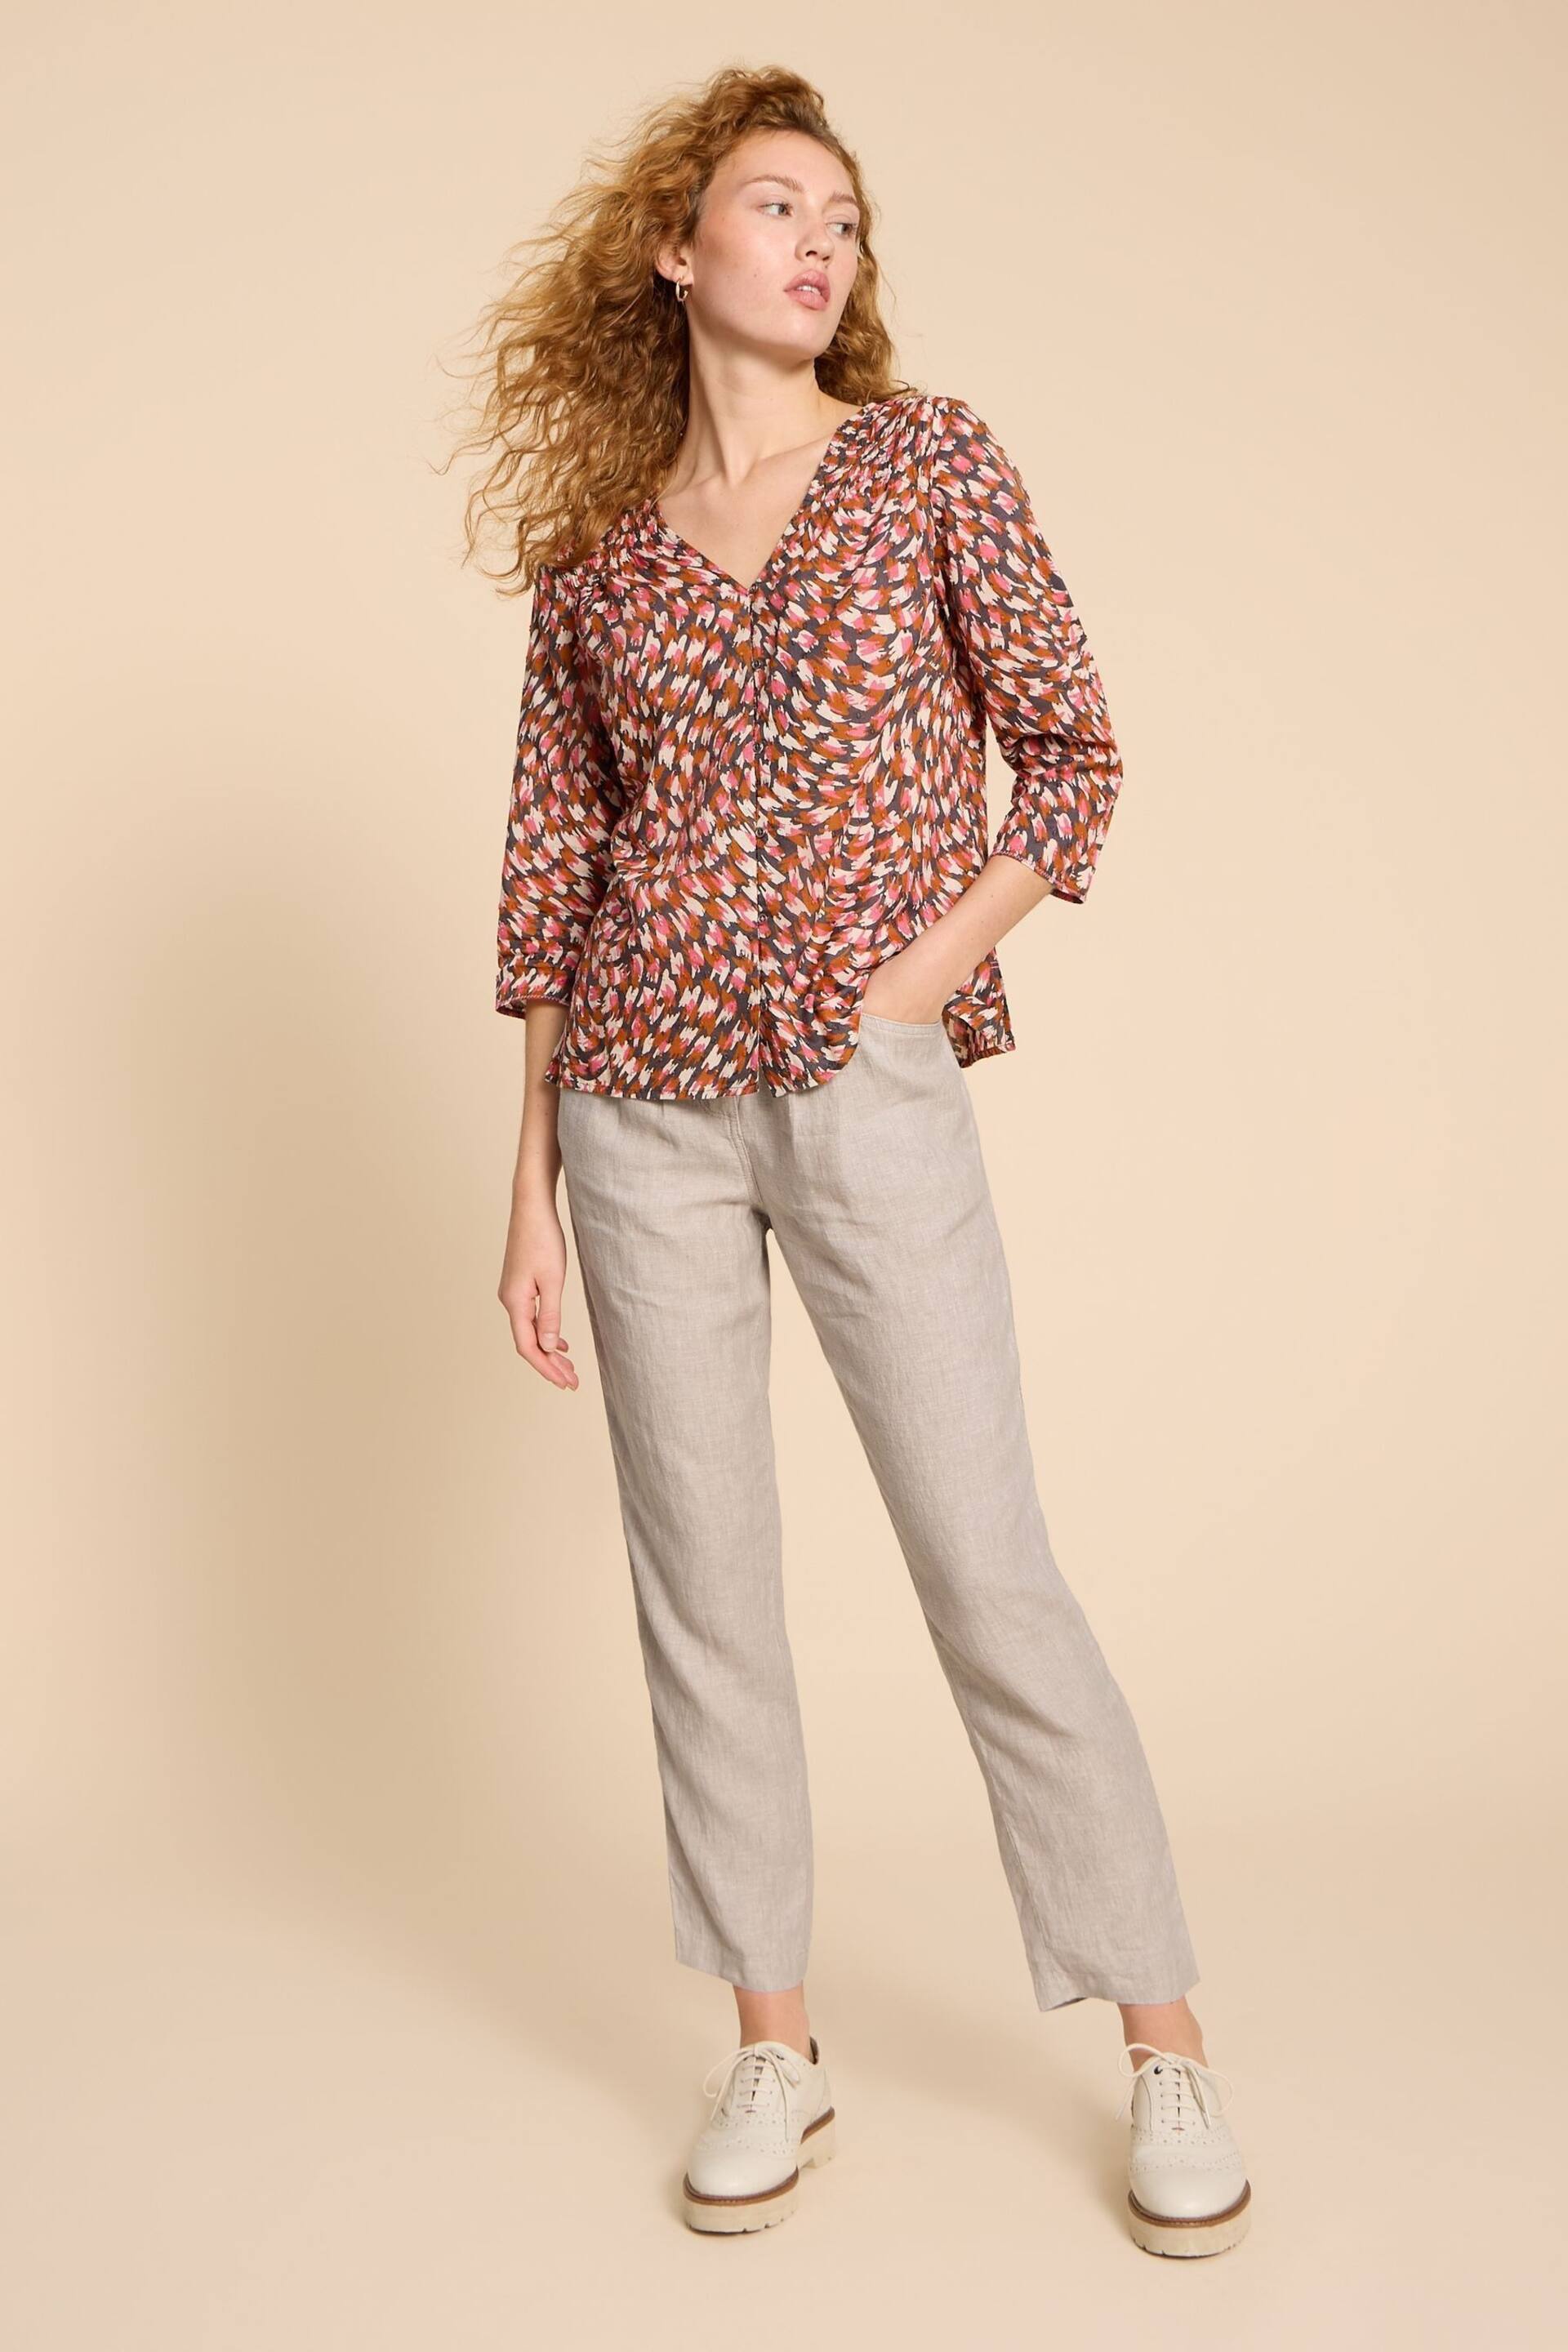 White Stuff Natural Rowena Linen Trousers - Image 3 of 7